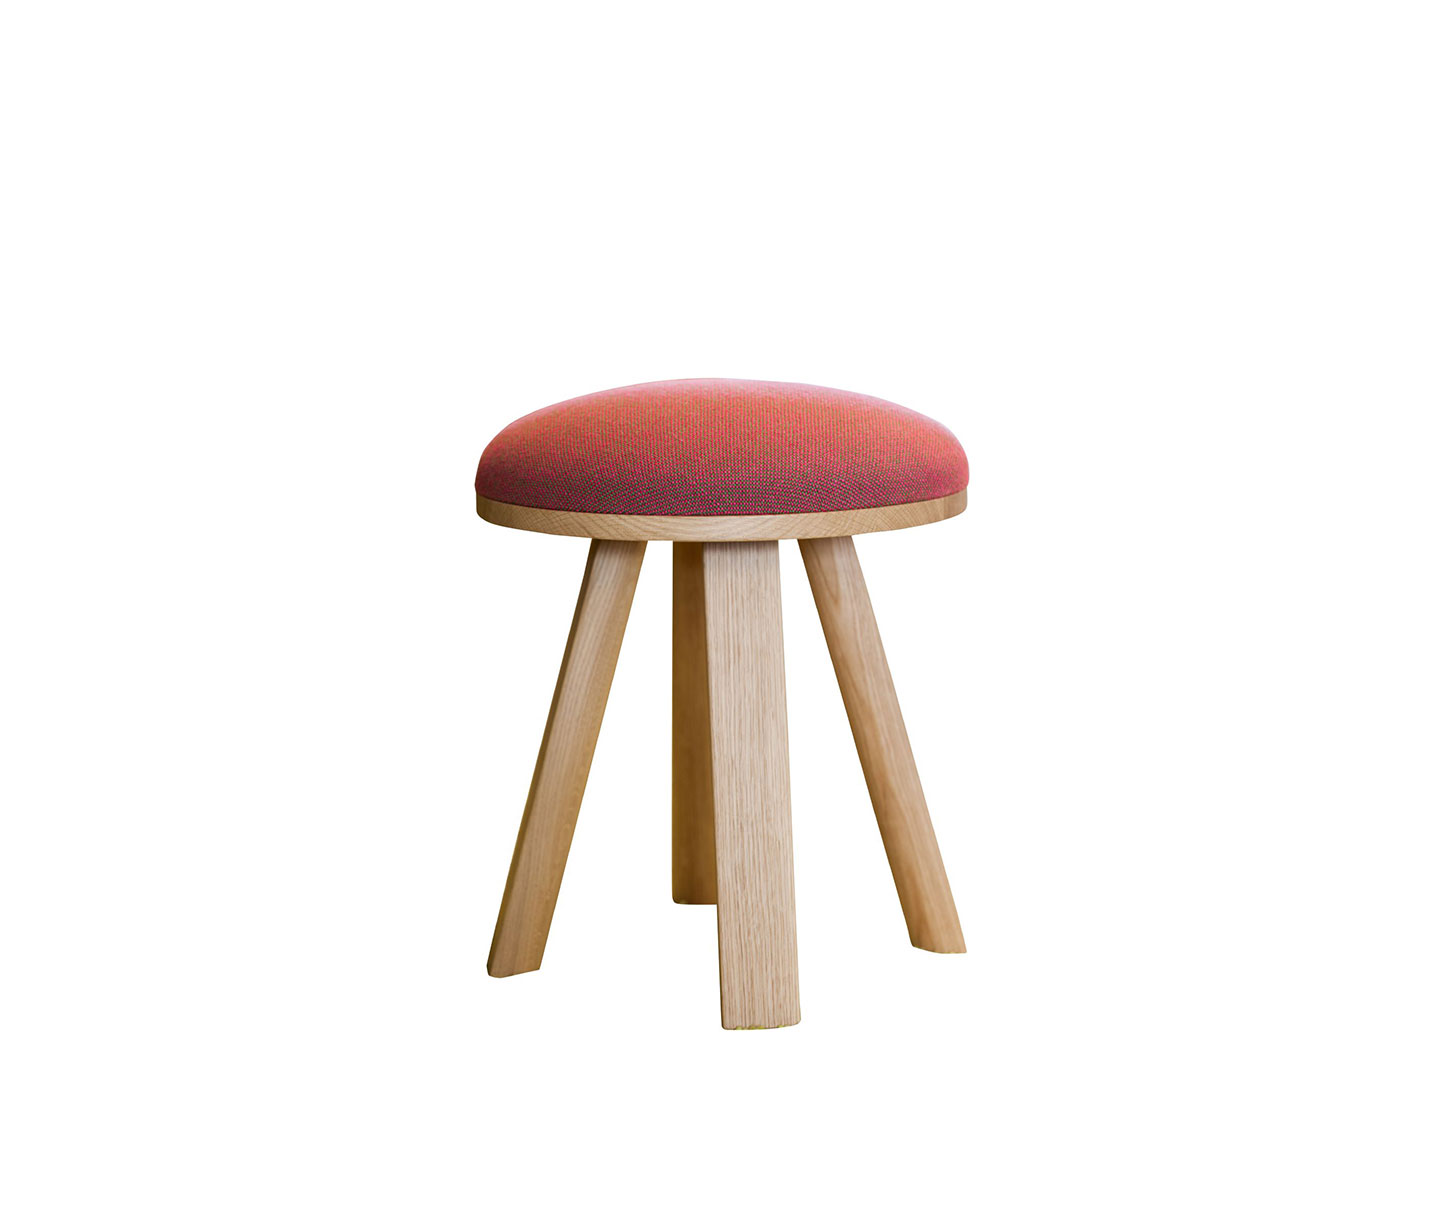 Haworth Buzzimilk stool in red cushion seating and wooden body